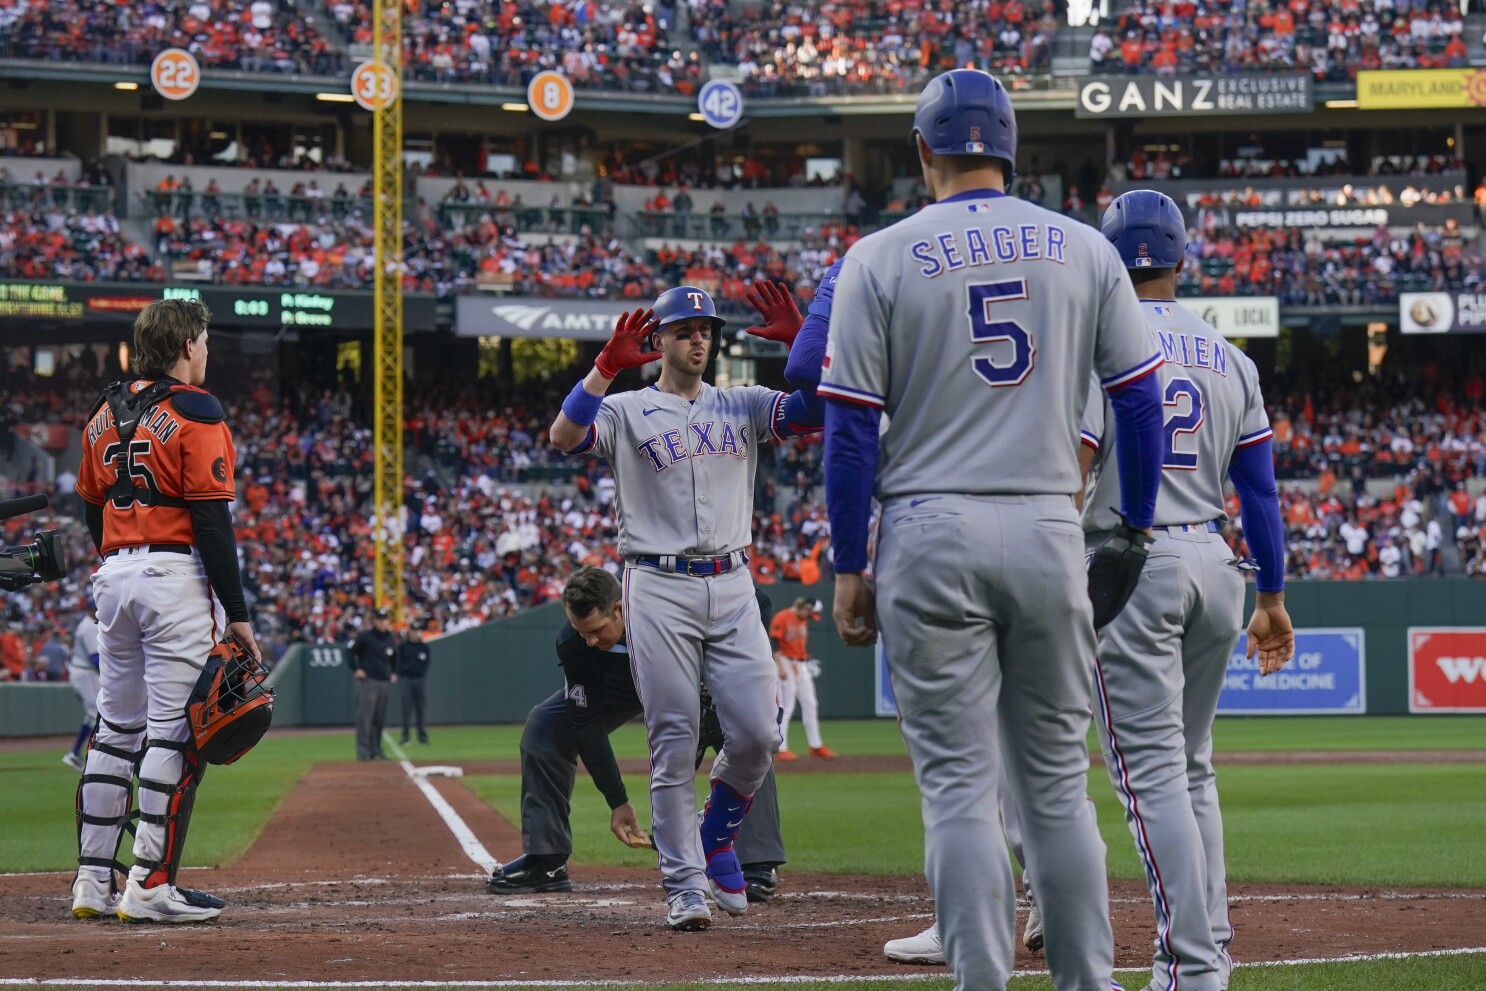 Mad Max returns for Rangers after month away with chance to put them up 3-0  over Astros in ALCS